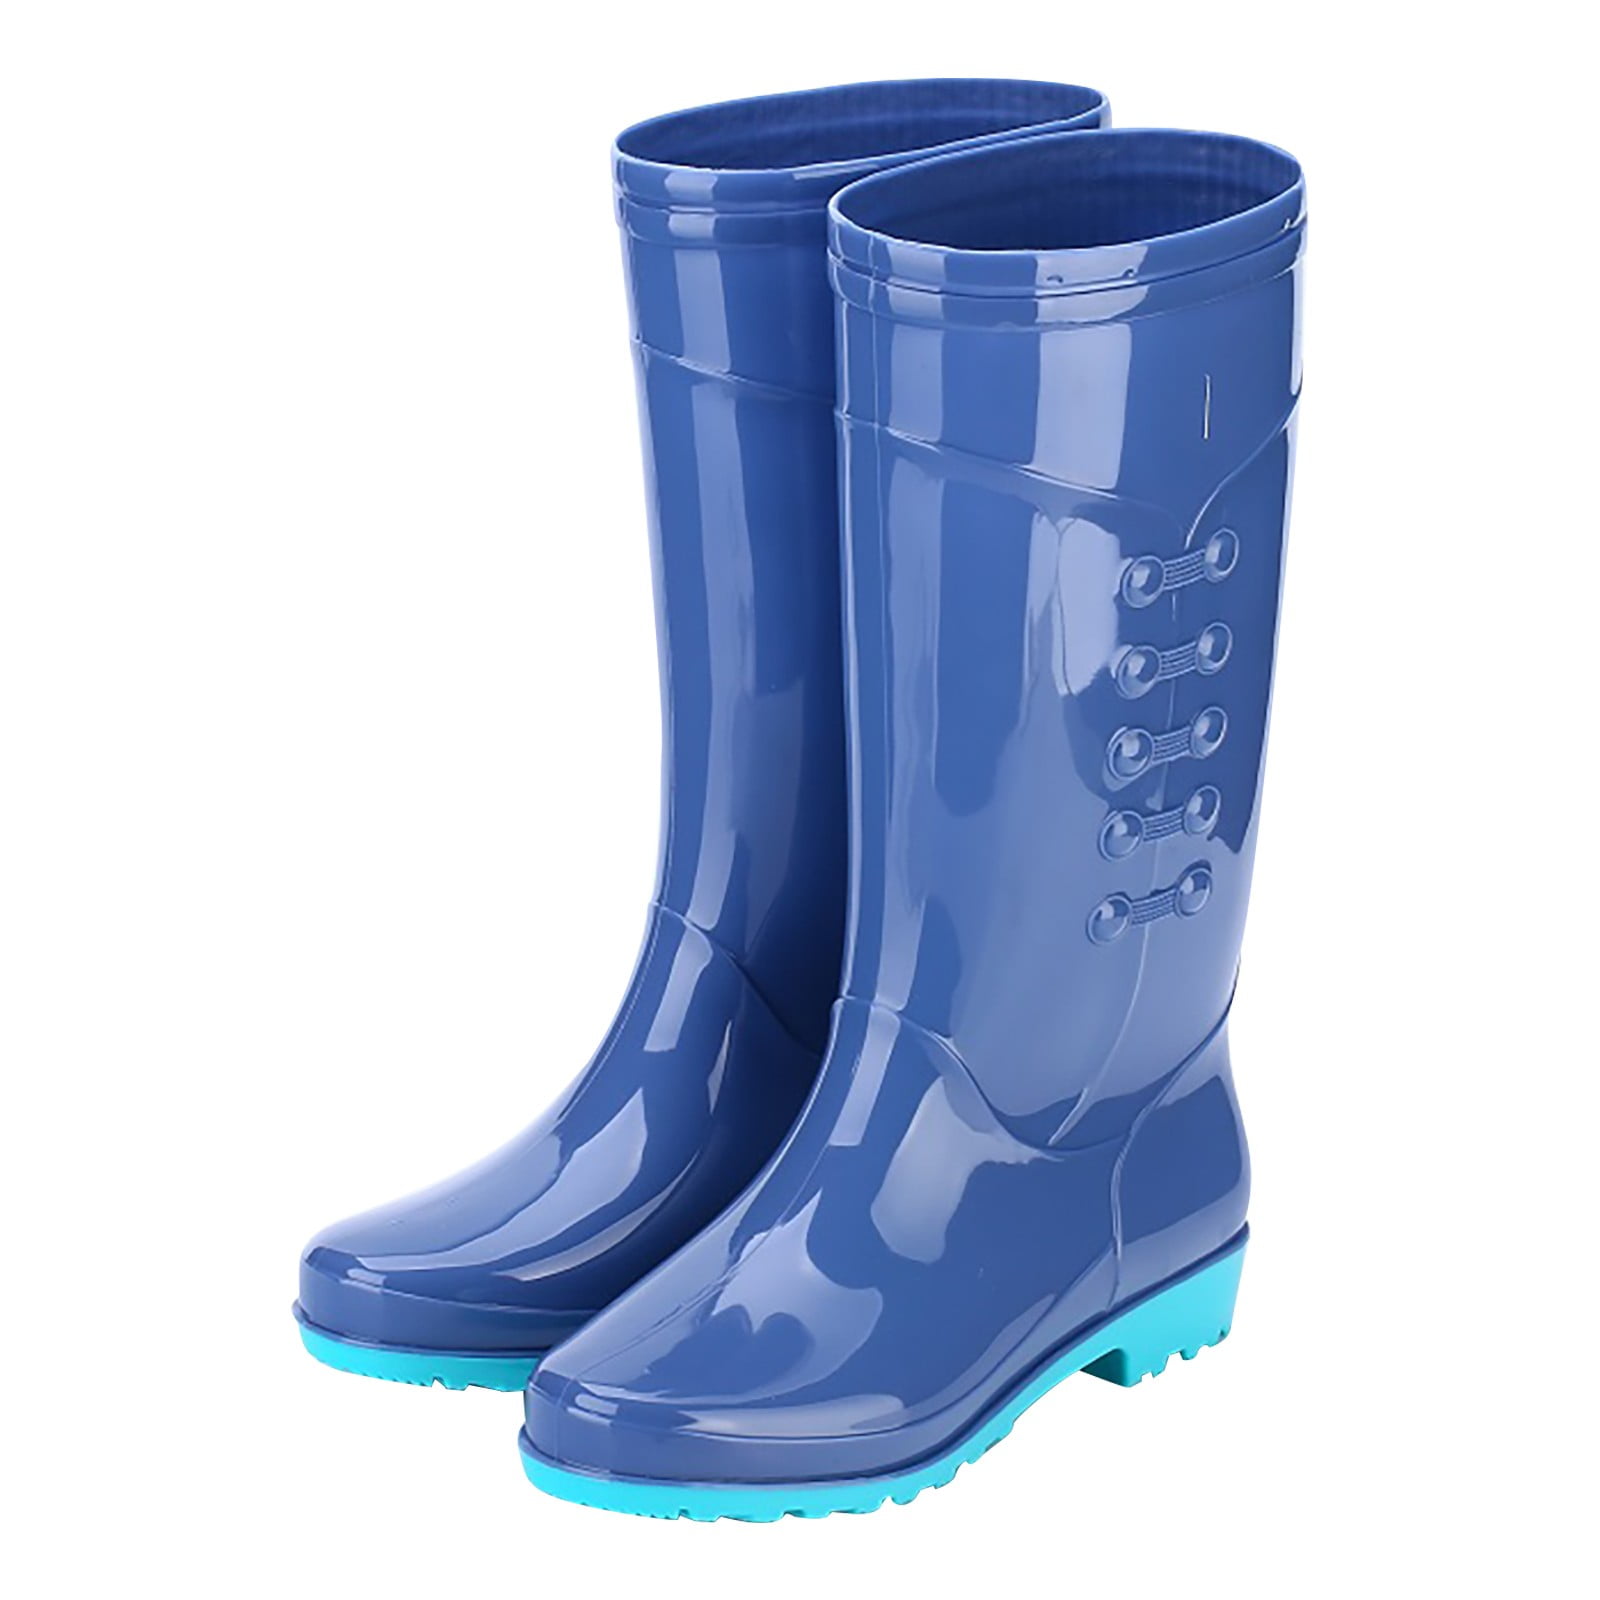 Dengmore Adult High-top Non-slip And Waterproof Rain Boots With Velvet ...